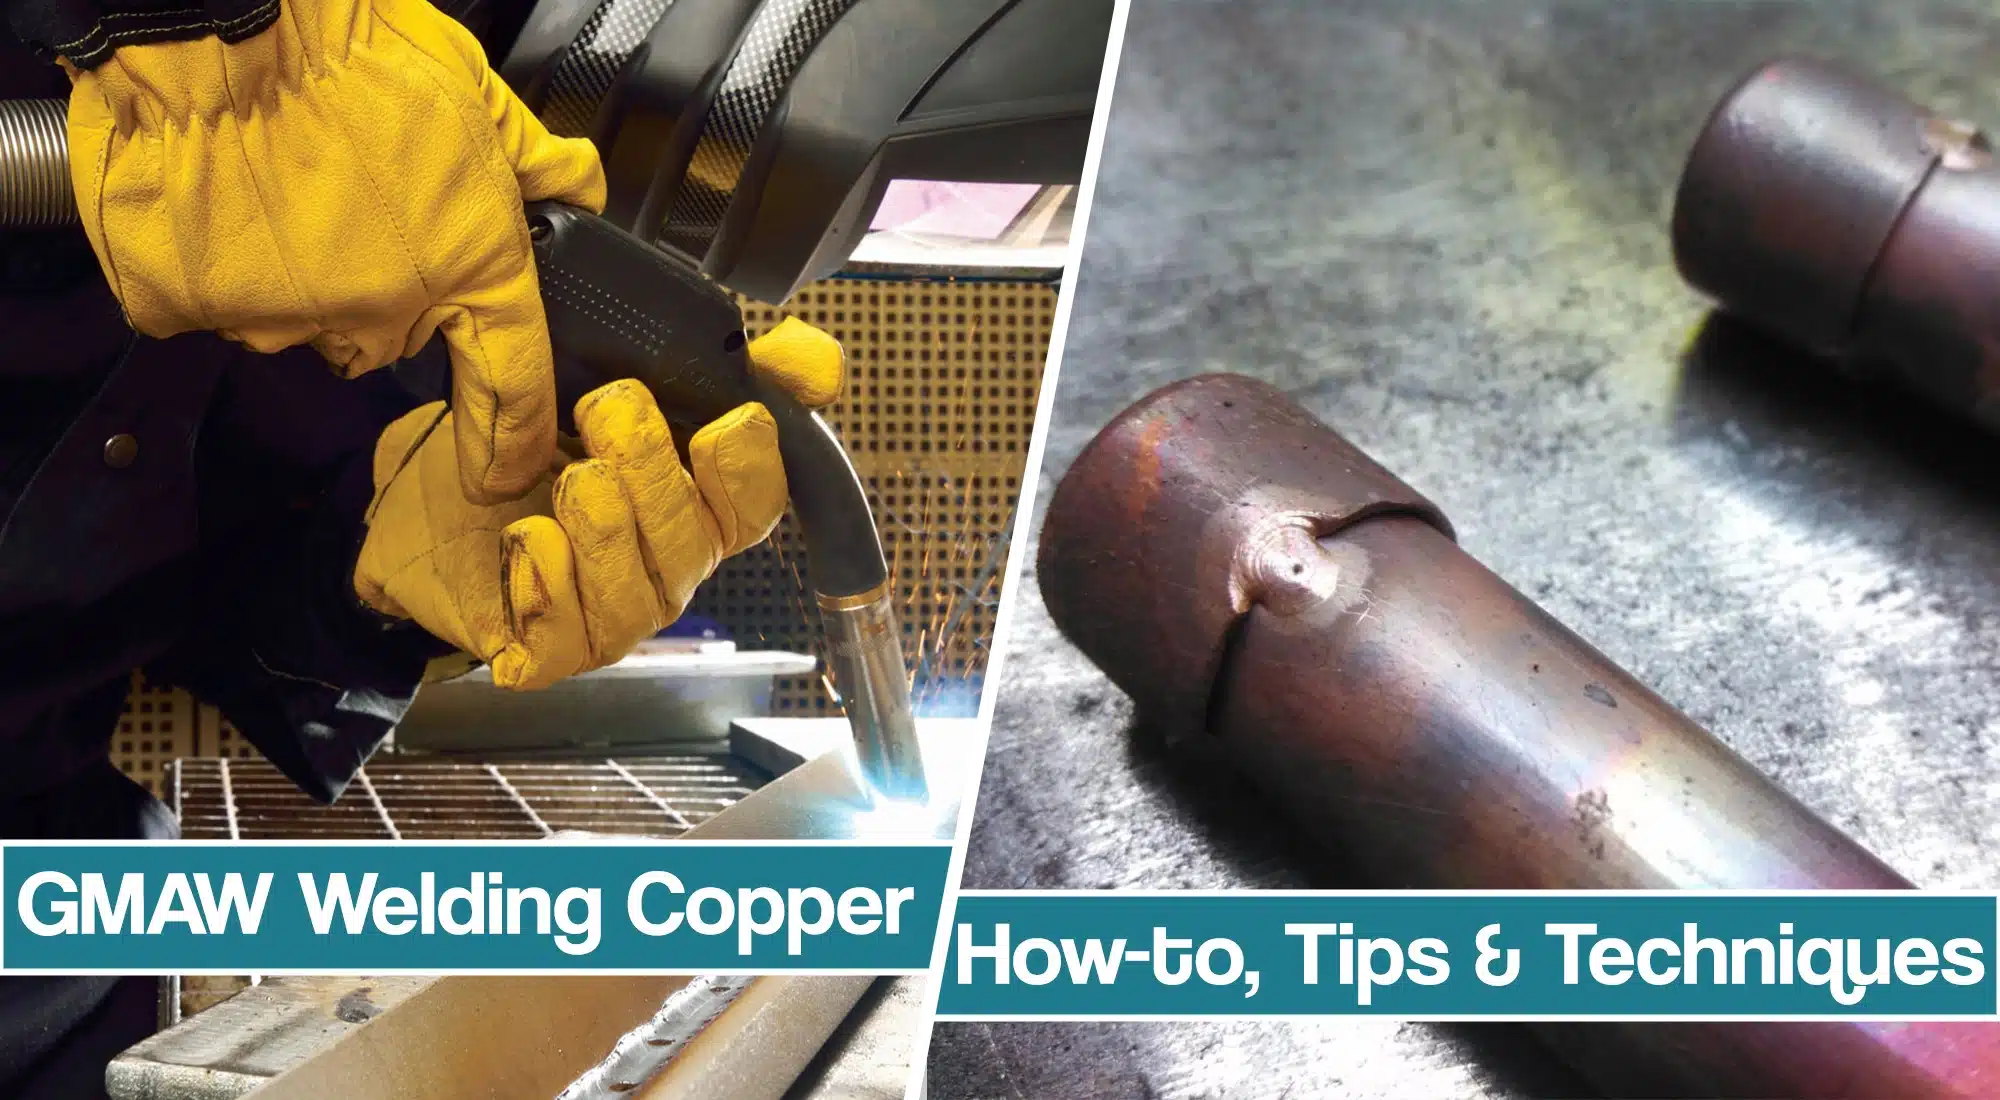 How To MIG Weld Copper -techniques & Tips For Successful Welds